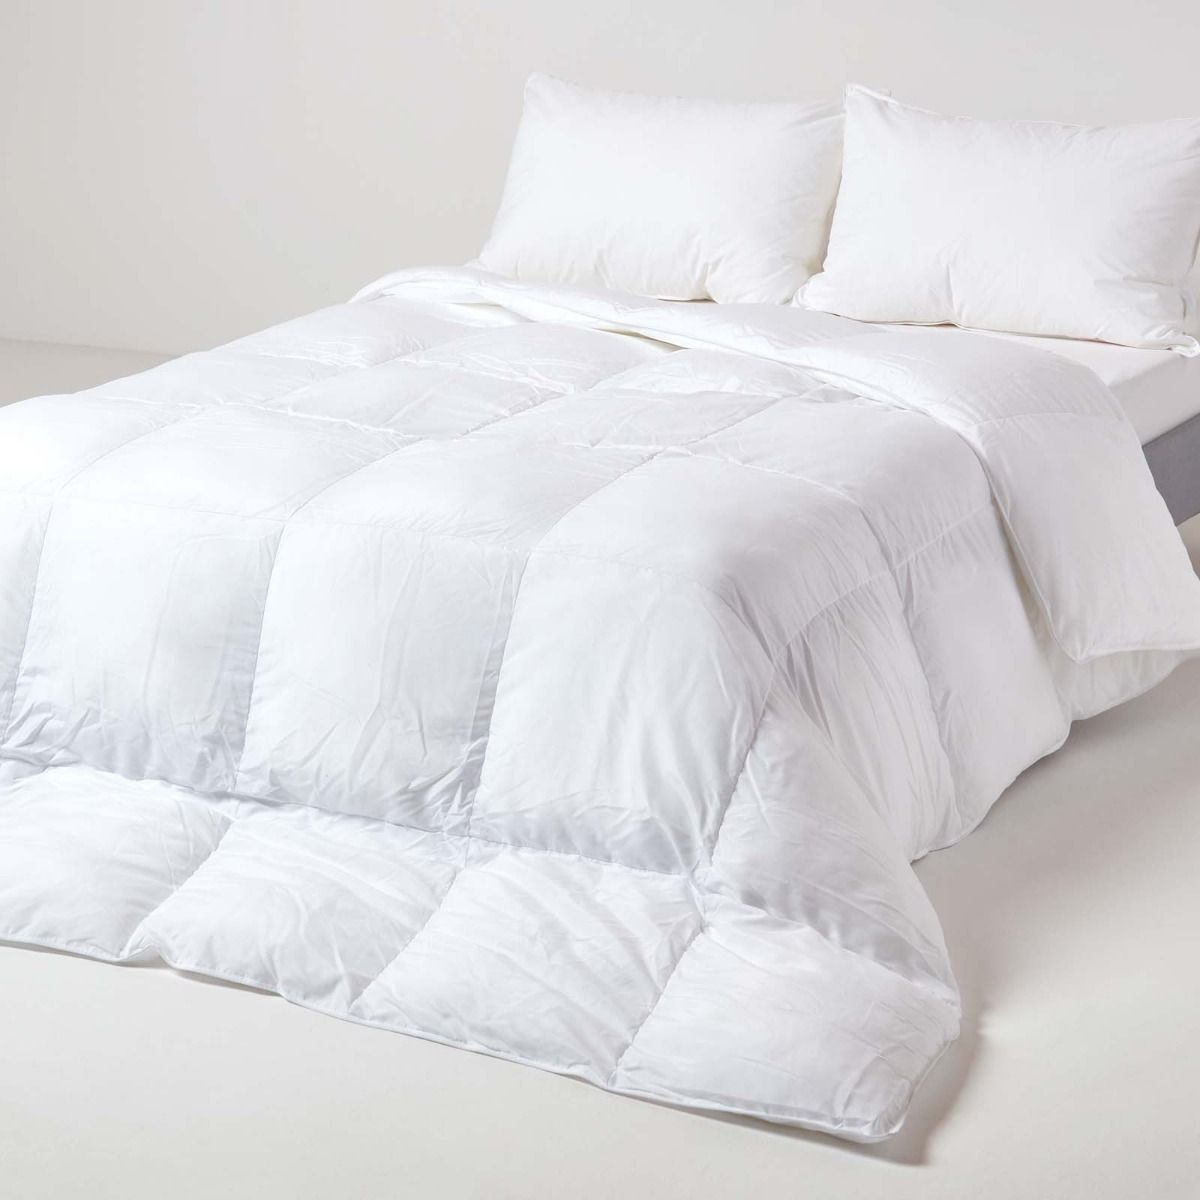 Double Details about   Snuggledown Ultimate Luxury 10.5 Tog All Year Round Duvet 